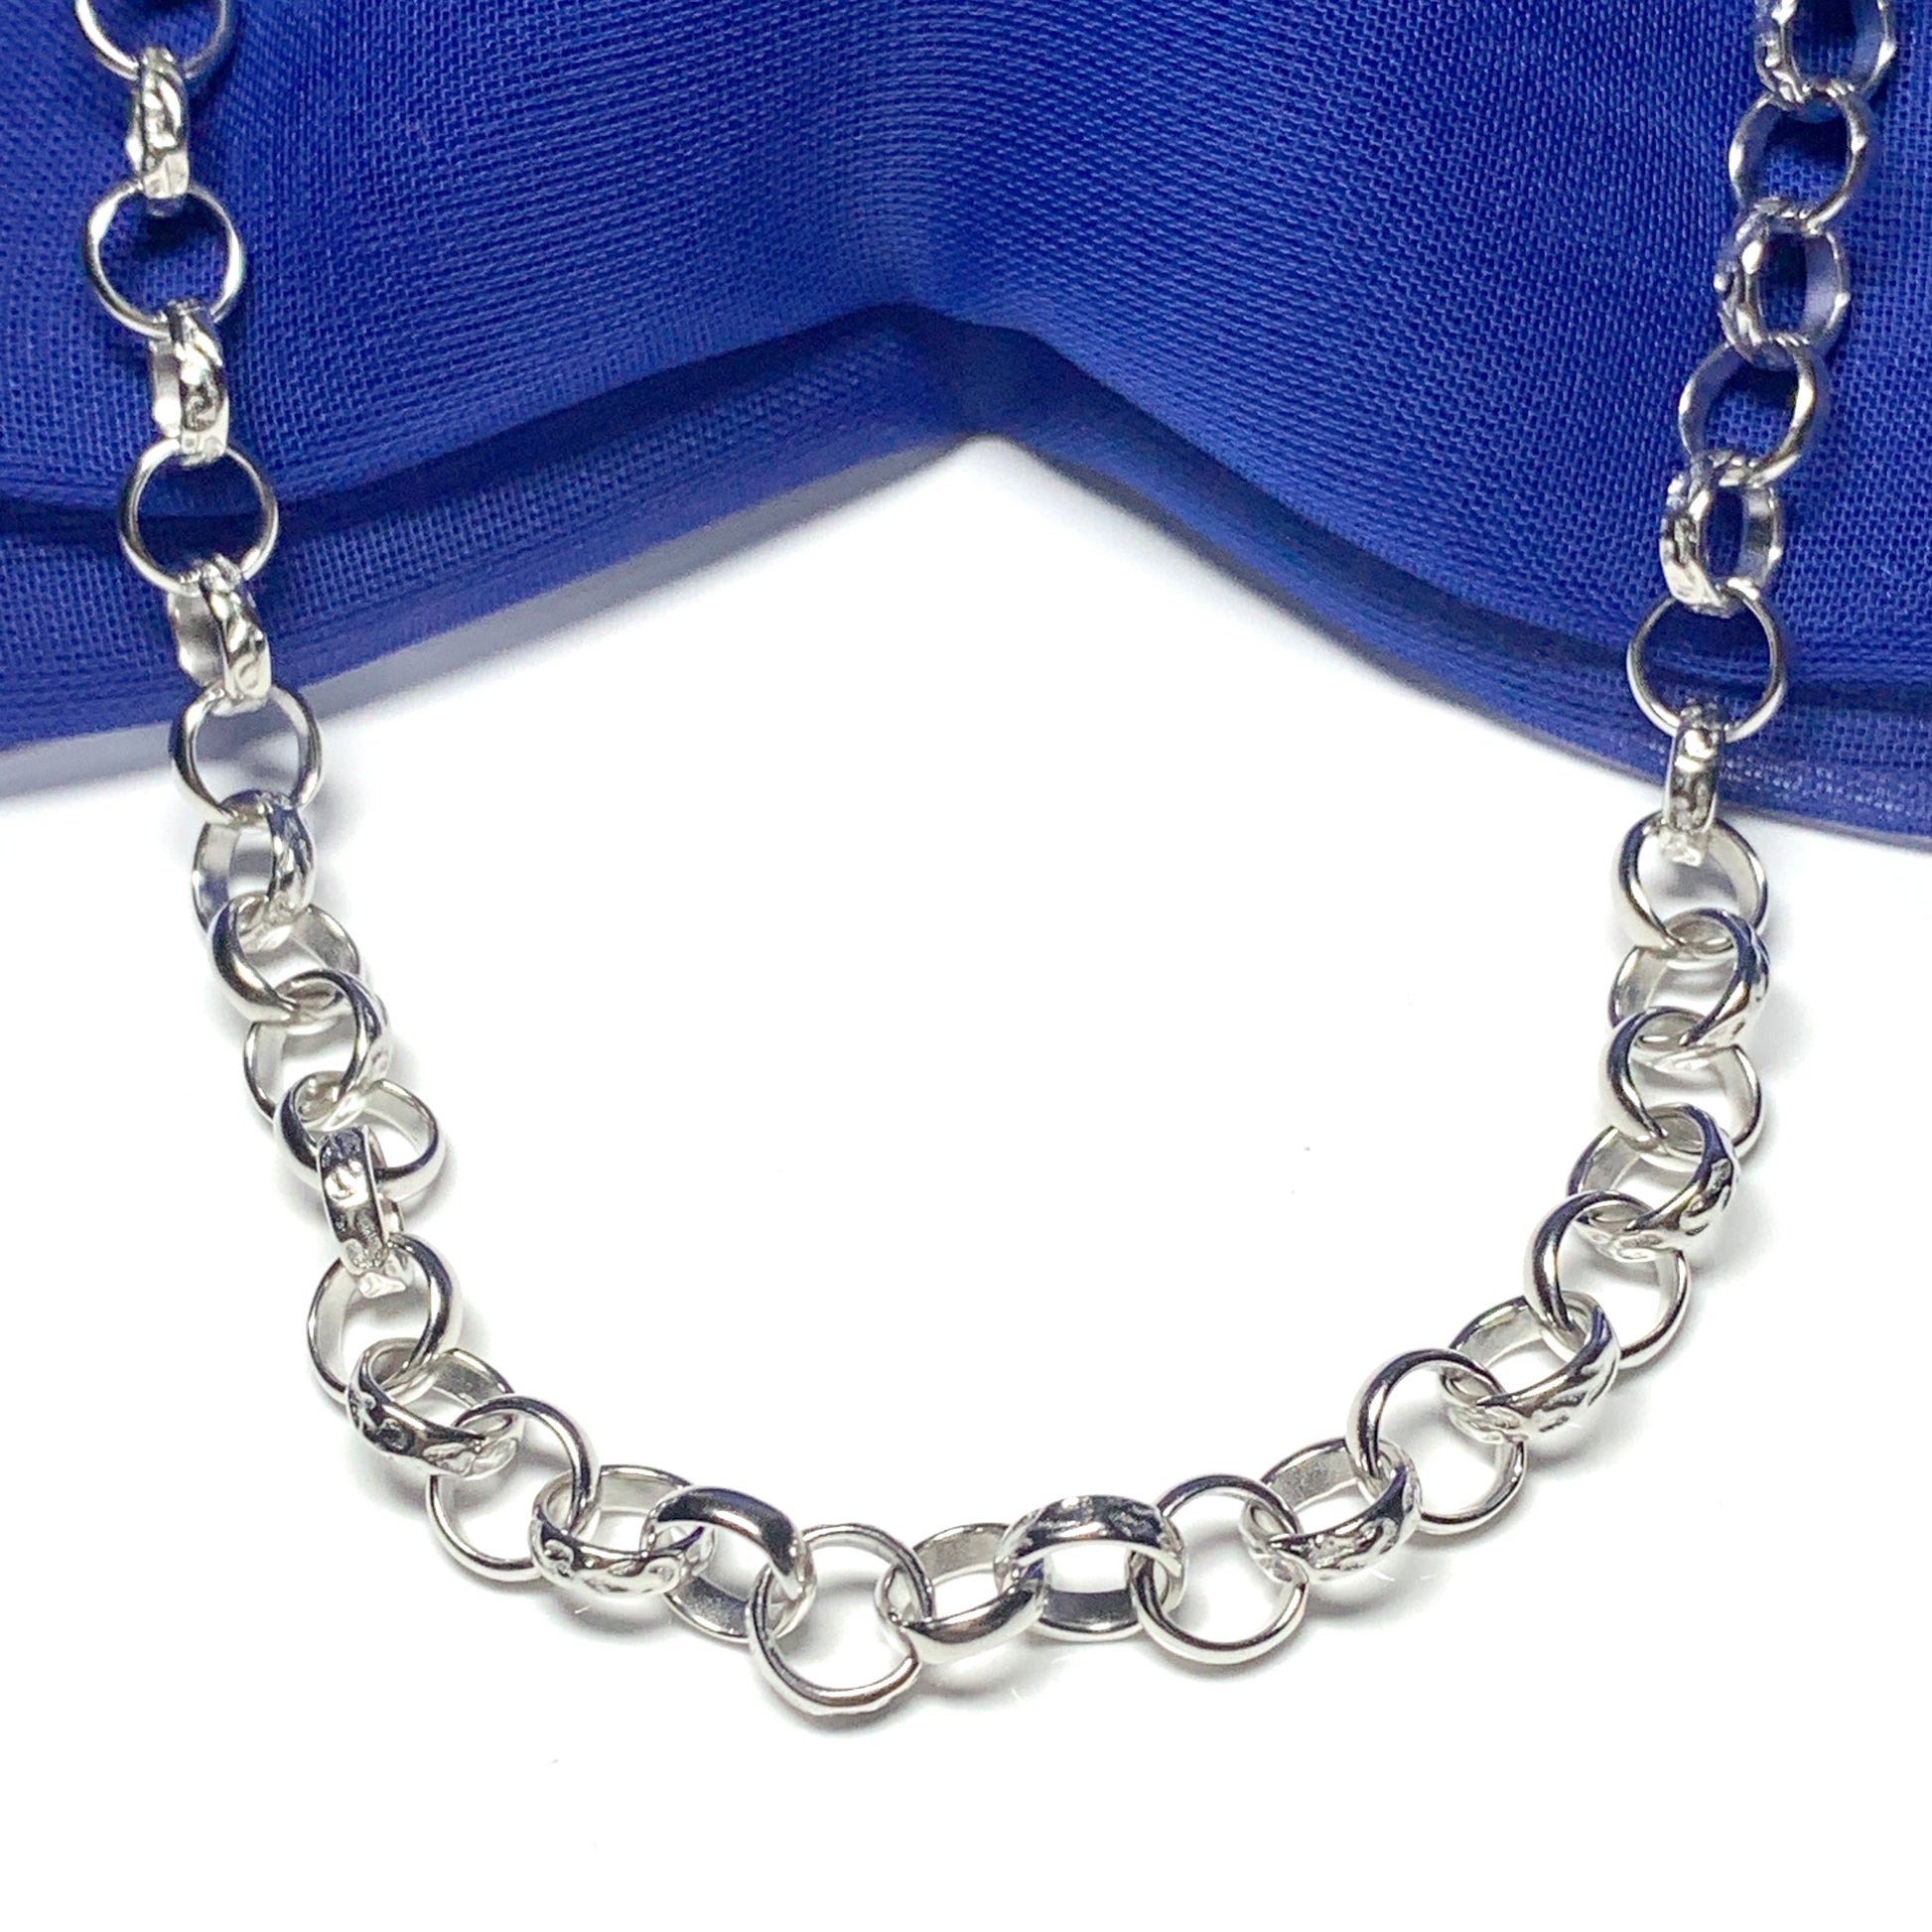 Men's solid sterling silver patterned round belcher chain necklace